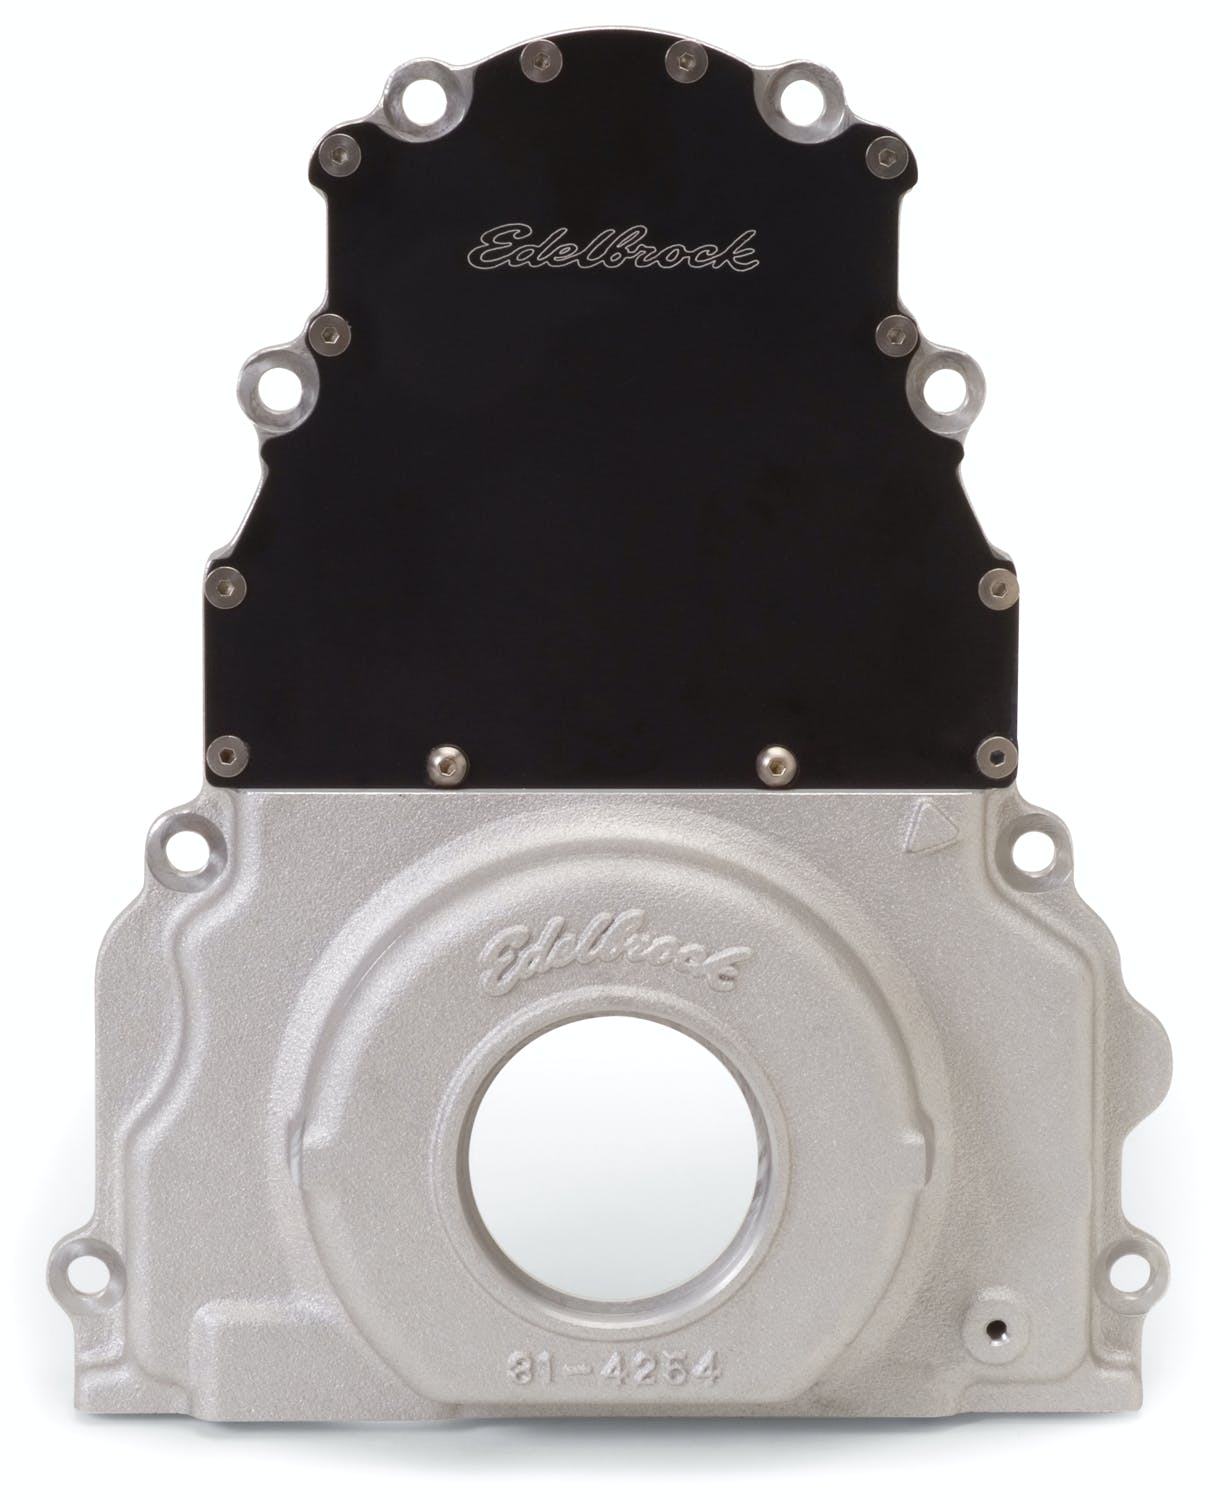 Edelbrock 4254 TIMING COVER 1997-04 GM LS1/LS6 TWO PIECE